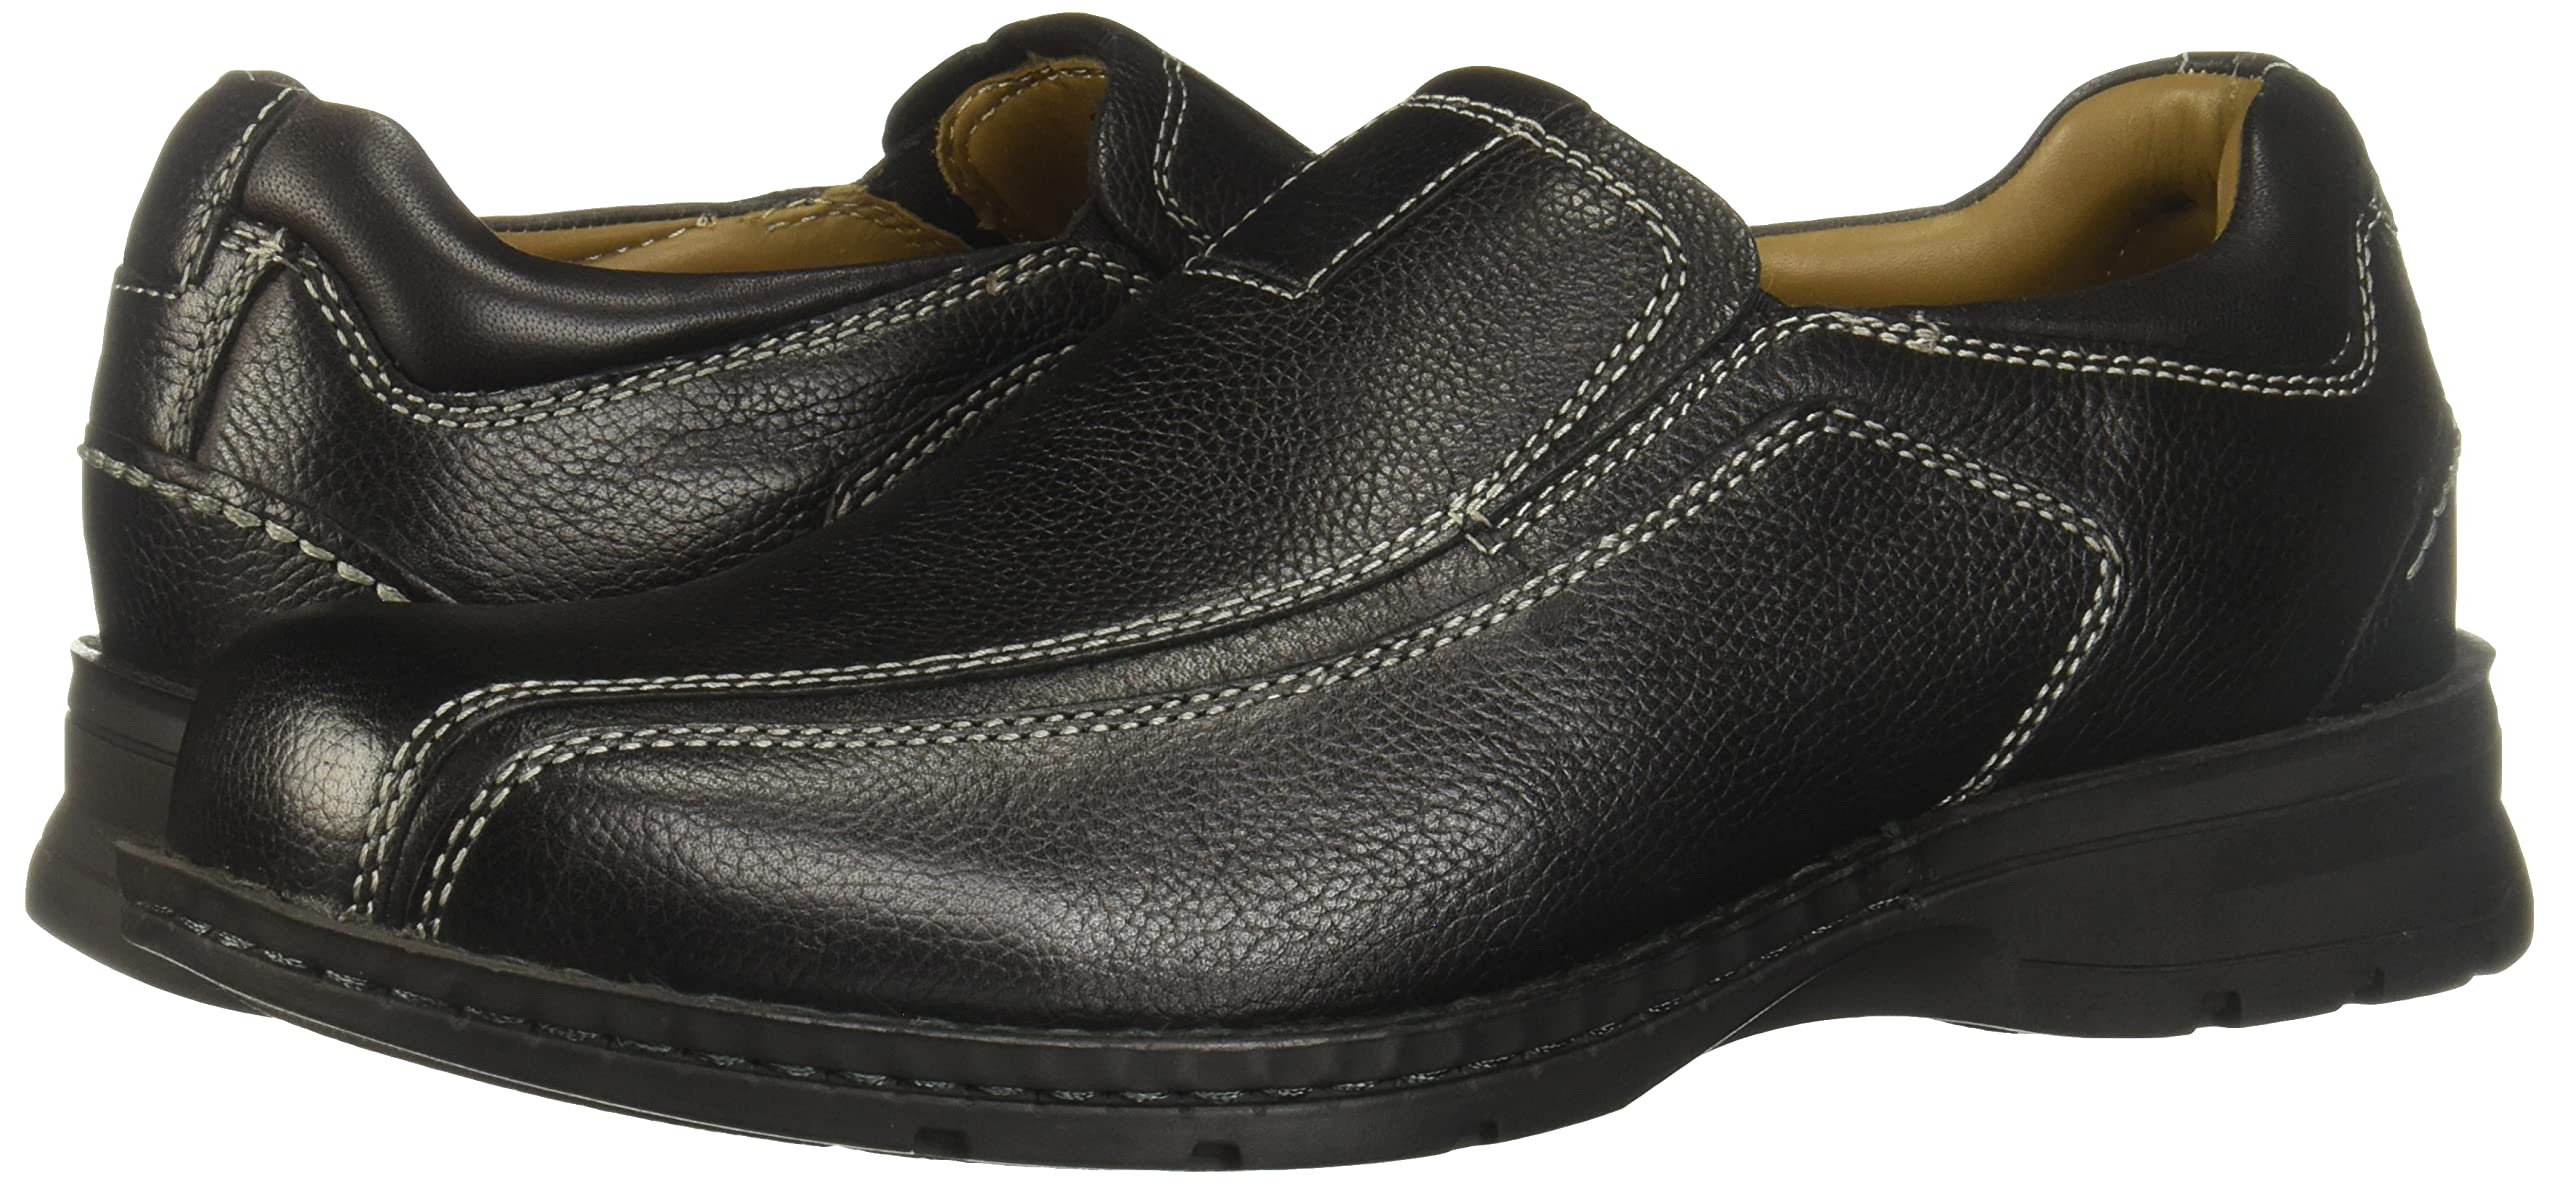 Dockers Men's Agent Leather Dress Casual Loafer Shoe